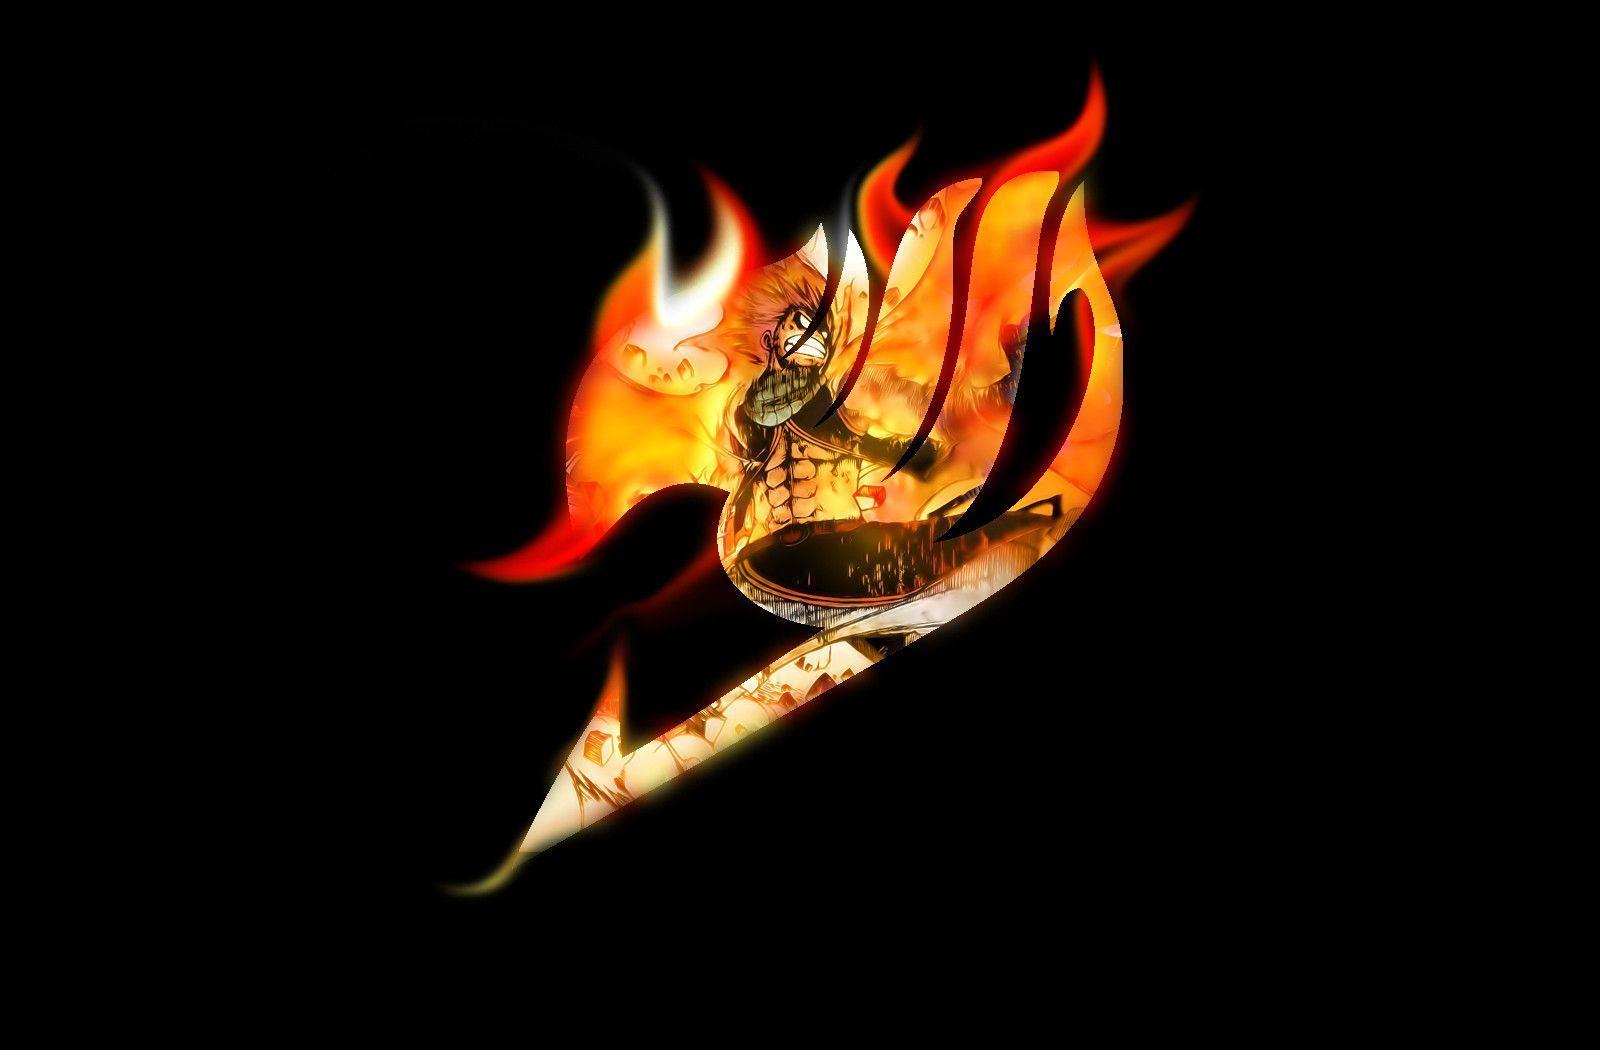 Wallpaper Movimiento Android - Fairy Tail Logo Flames - HD Wallpaper 